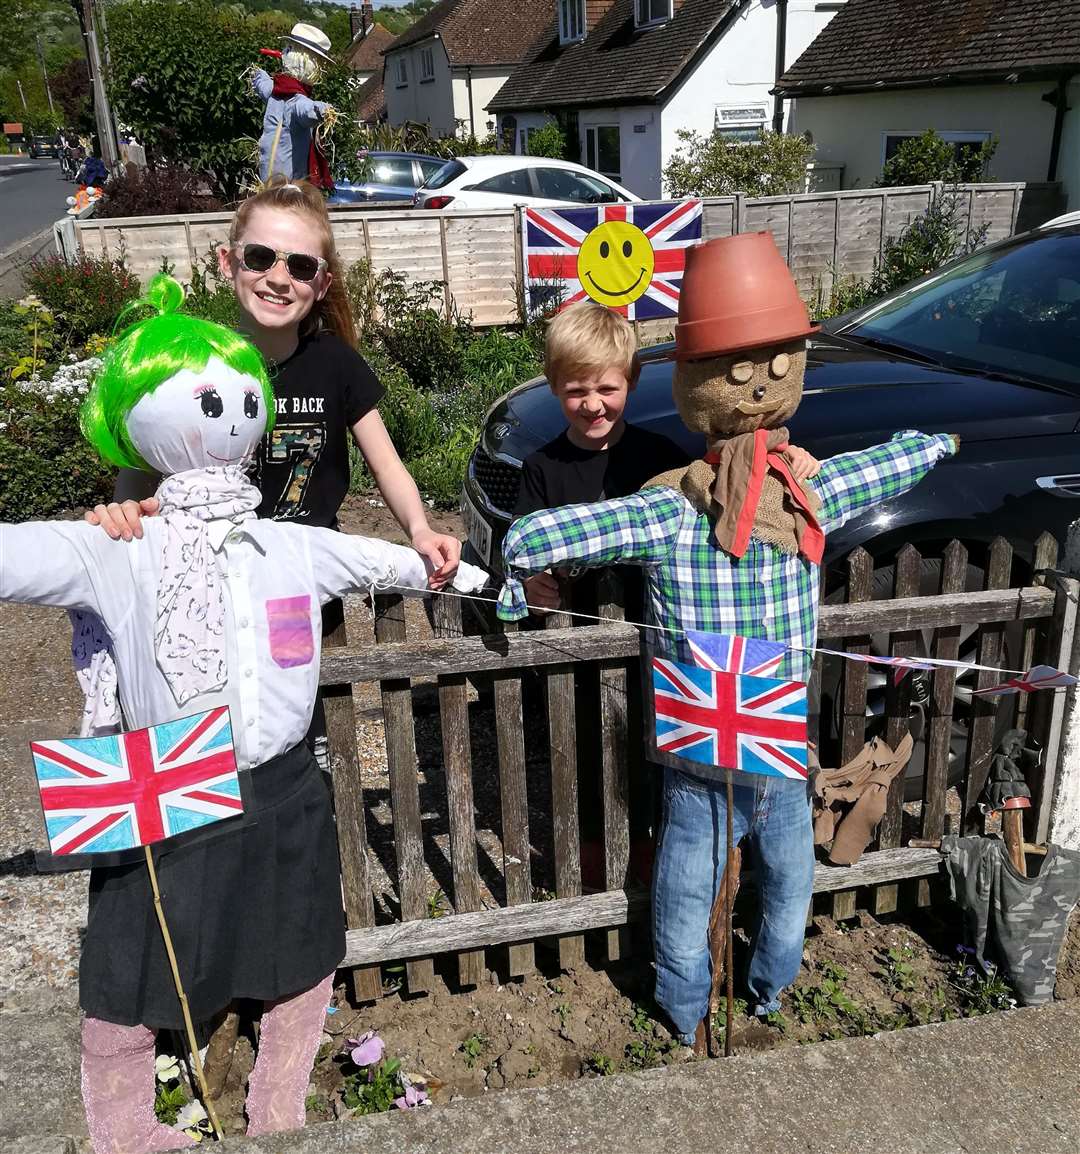 Olivia and Matthew Hill, of West Hythe Road, who came up with the scarecrow idea for their street